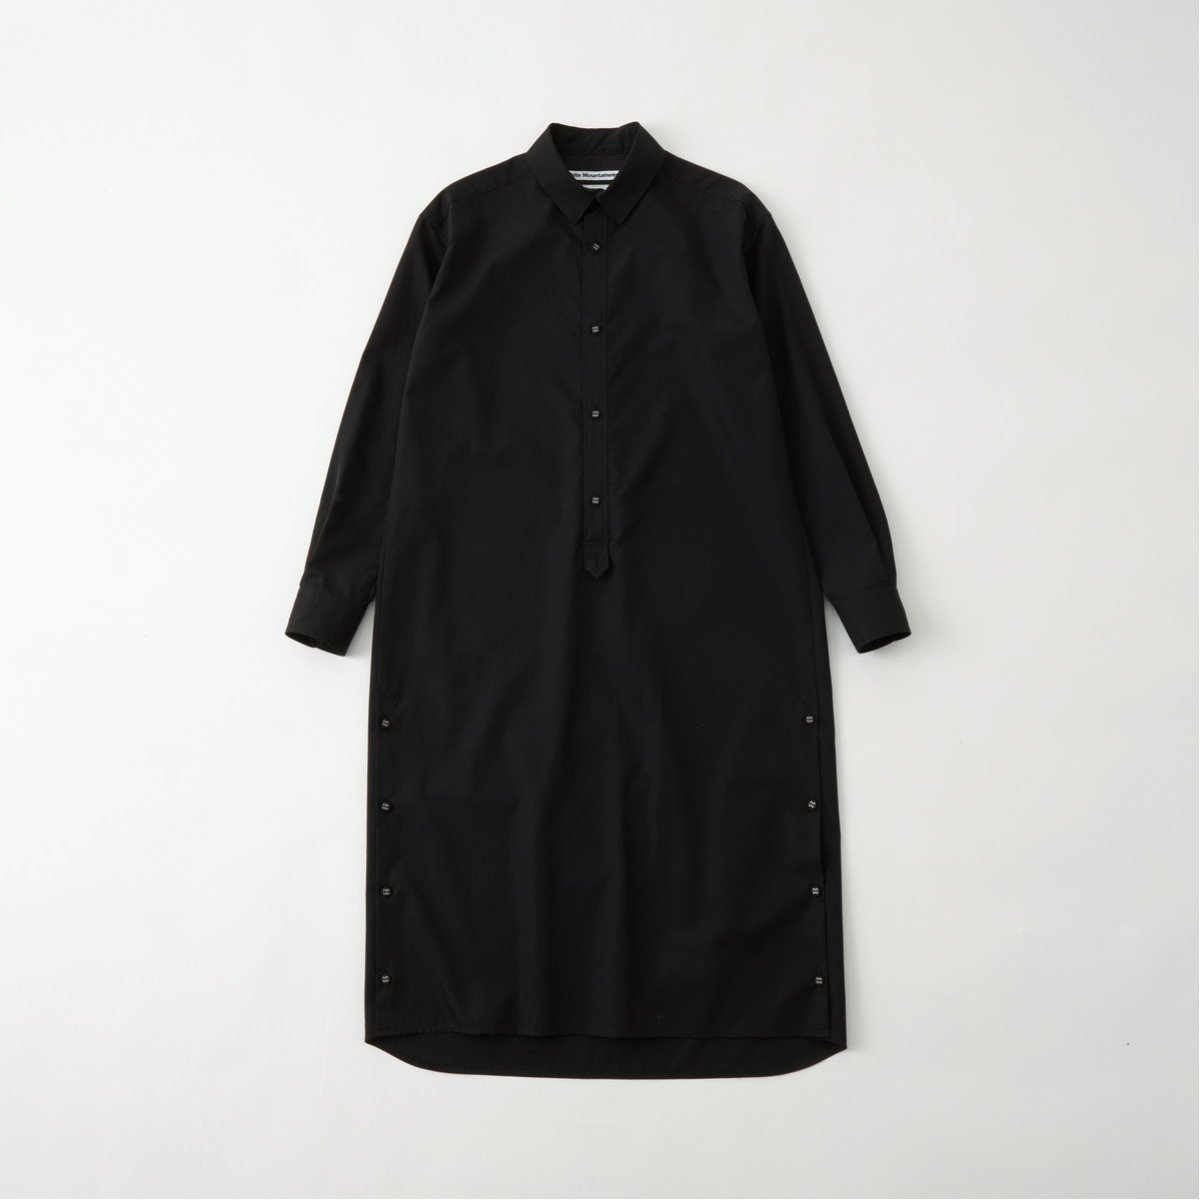 【SALE／30%OFF】White Mountaineering BROAD PULLOVER DRESS SHIRT ホワイトマウンテニアリング ワンピース・ドレス シャツワンピース..